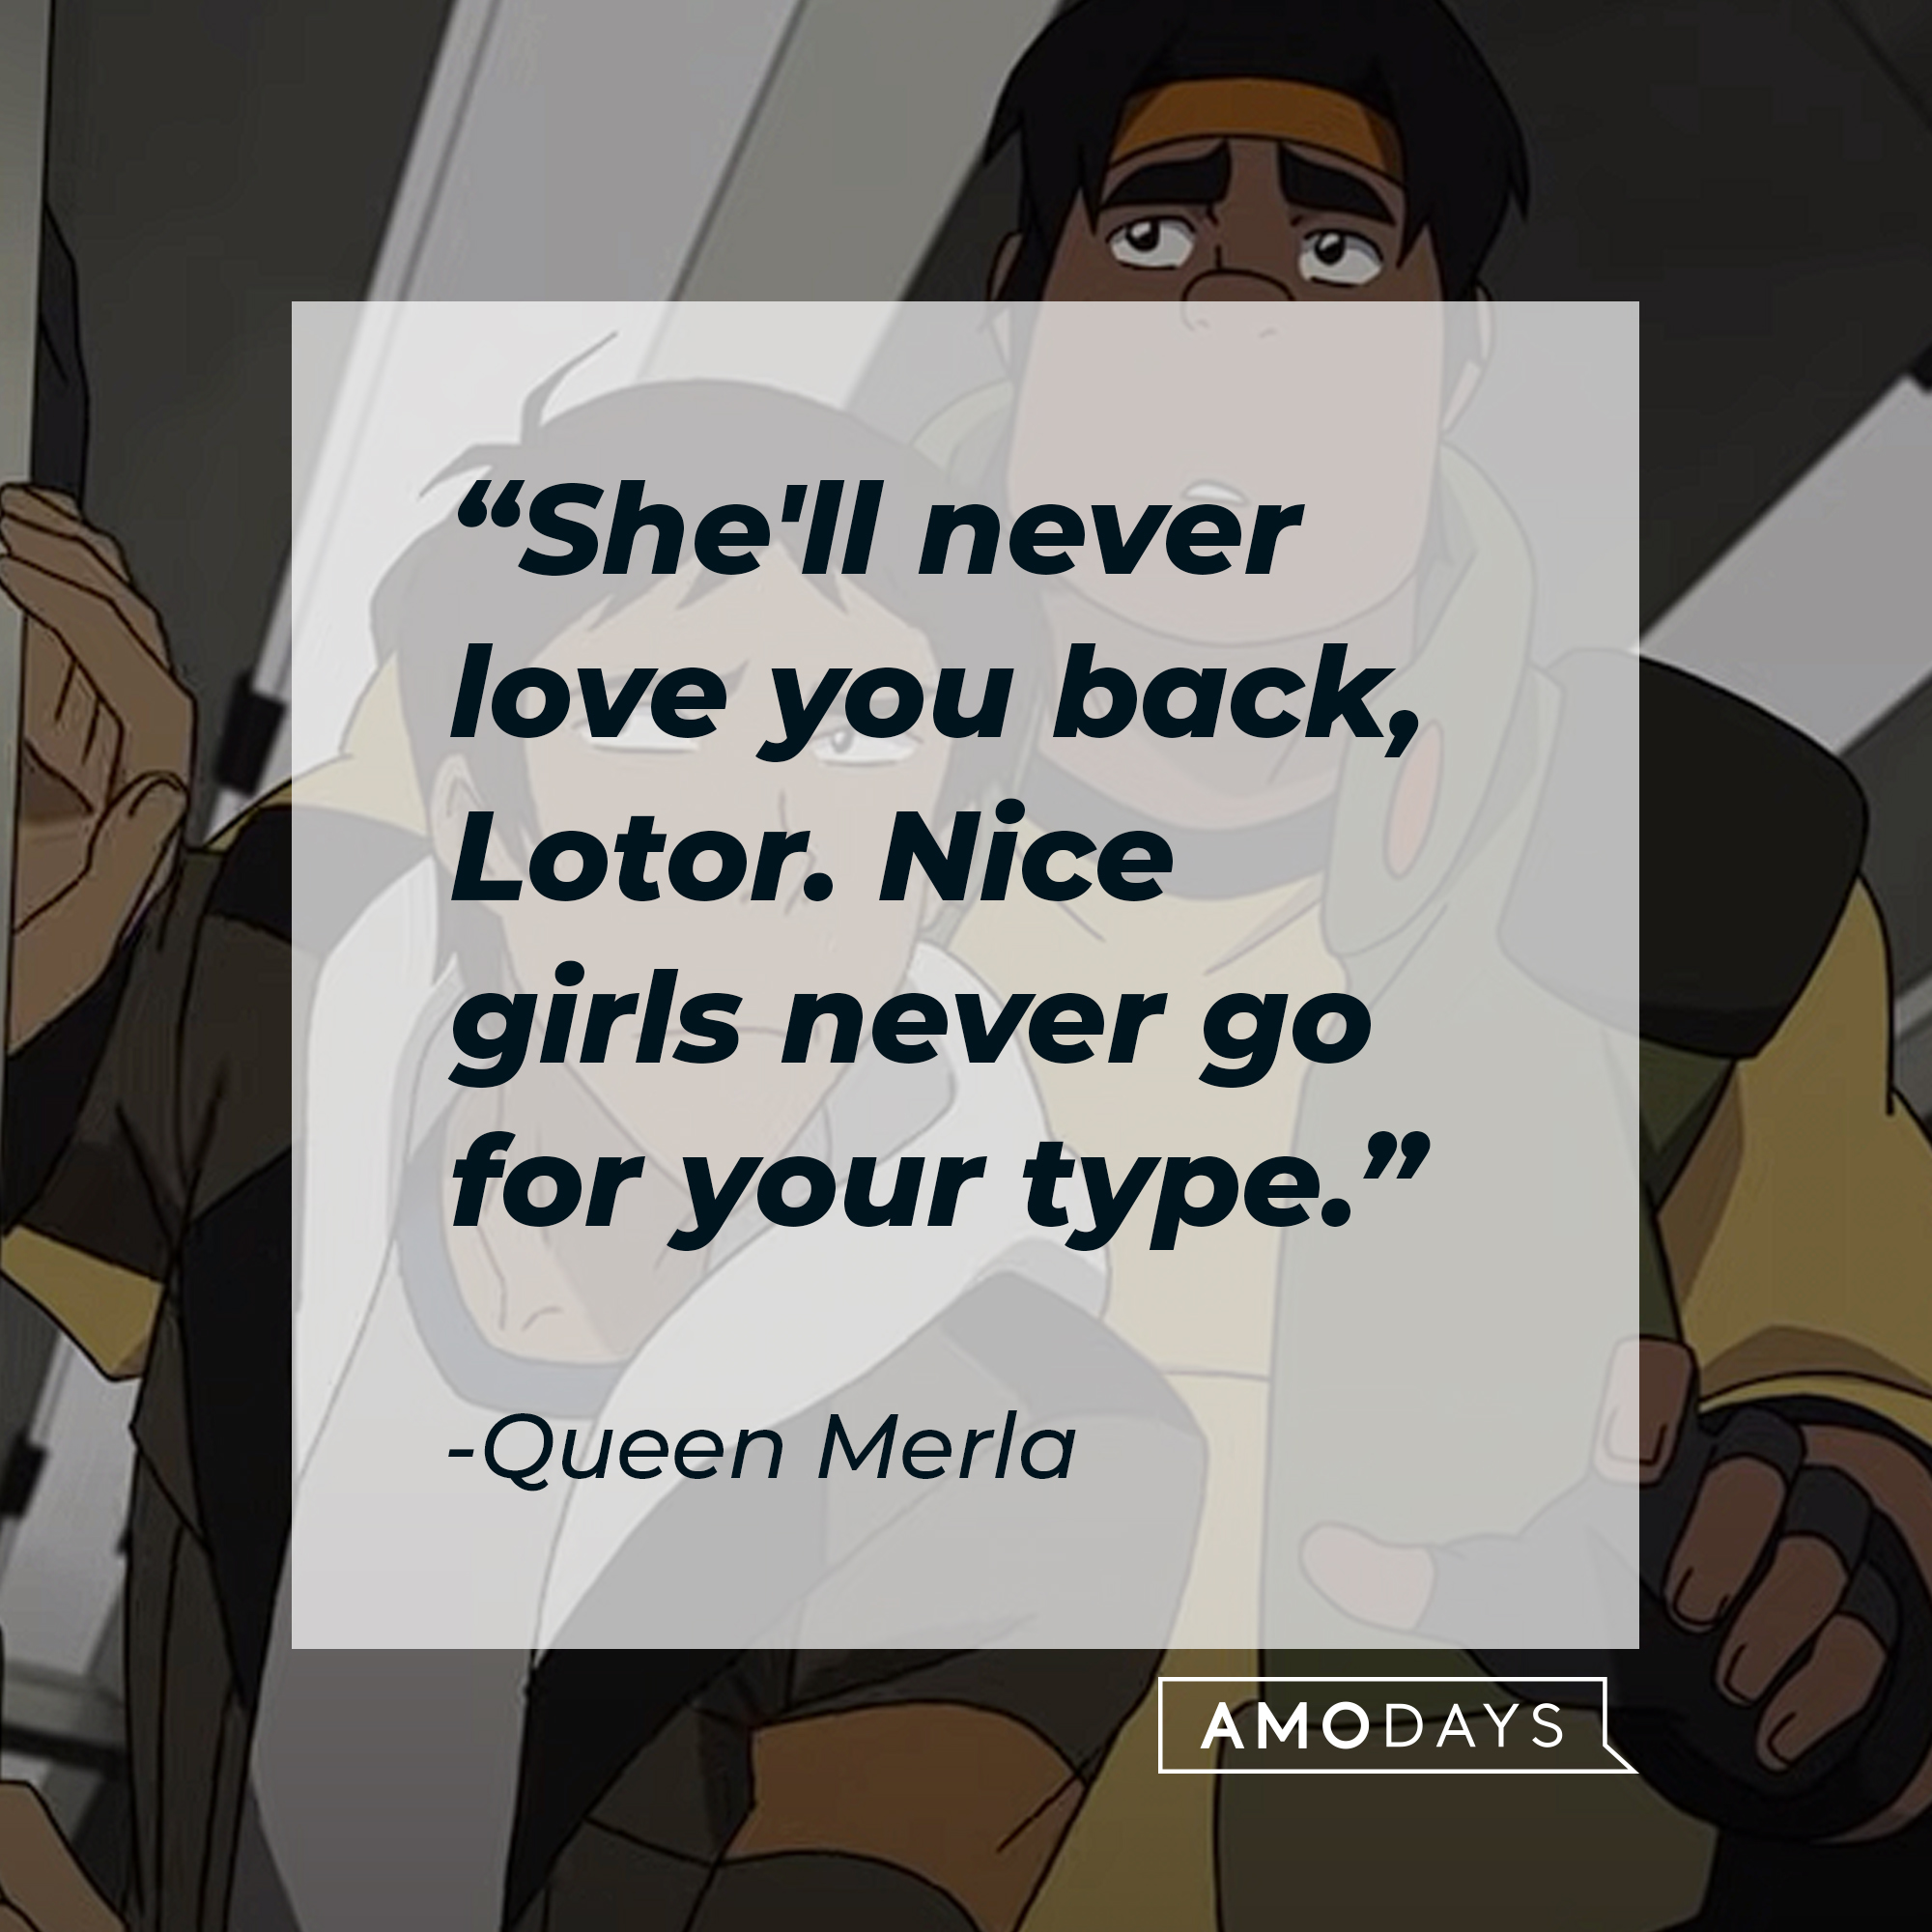 Queen Merla's quote: "She'll never love you back, Lotor. Nice girls never go for your type." | Source: youtube.com/netflixafterschool